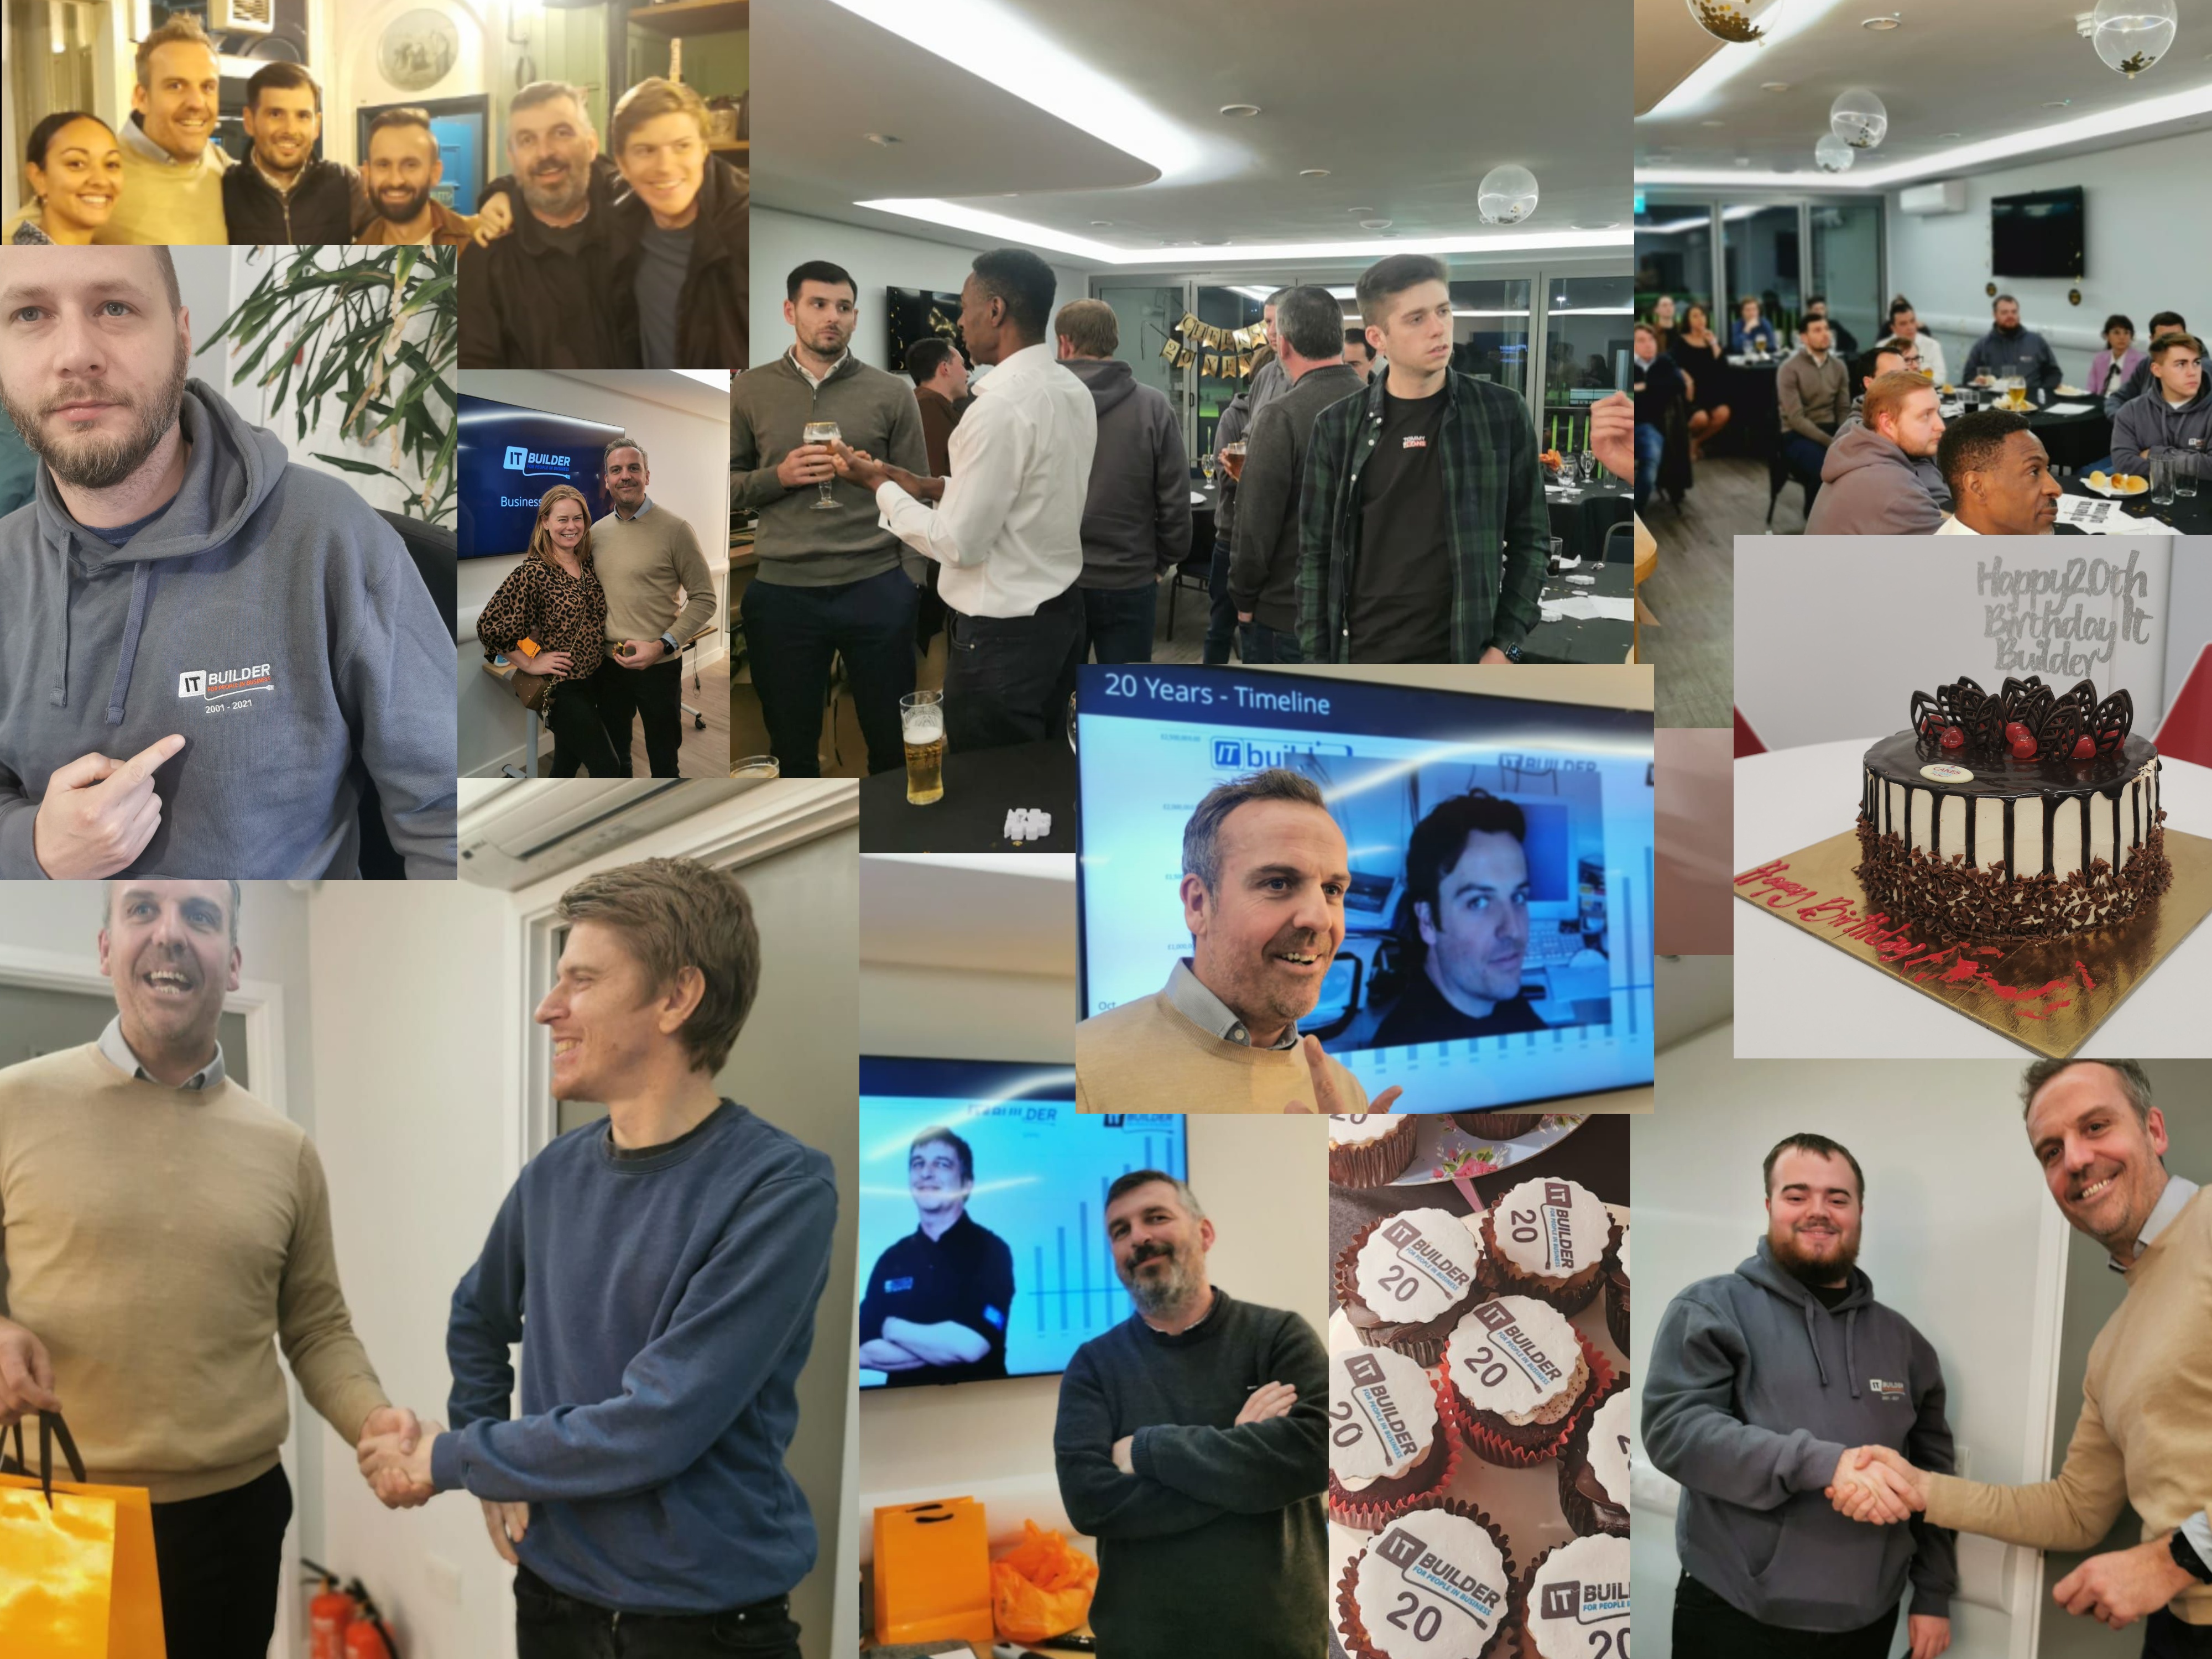 Collage of images from ITbuilder 20th anniversary celebration